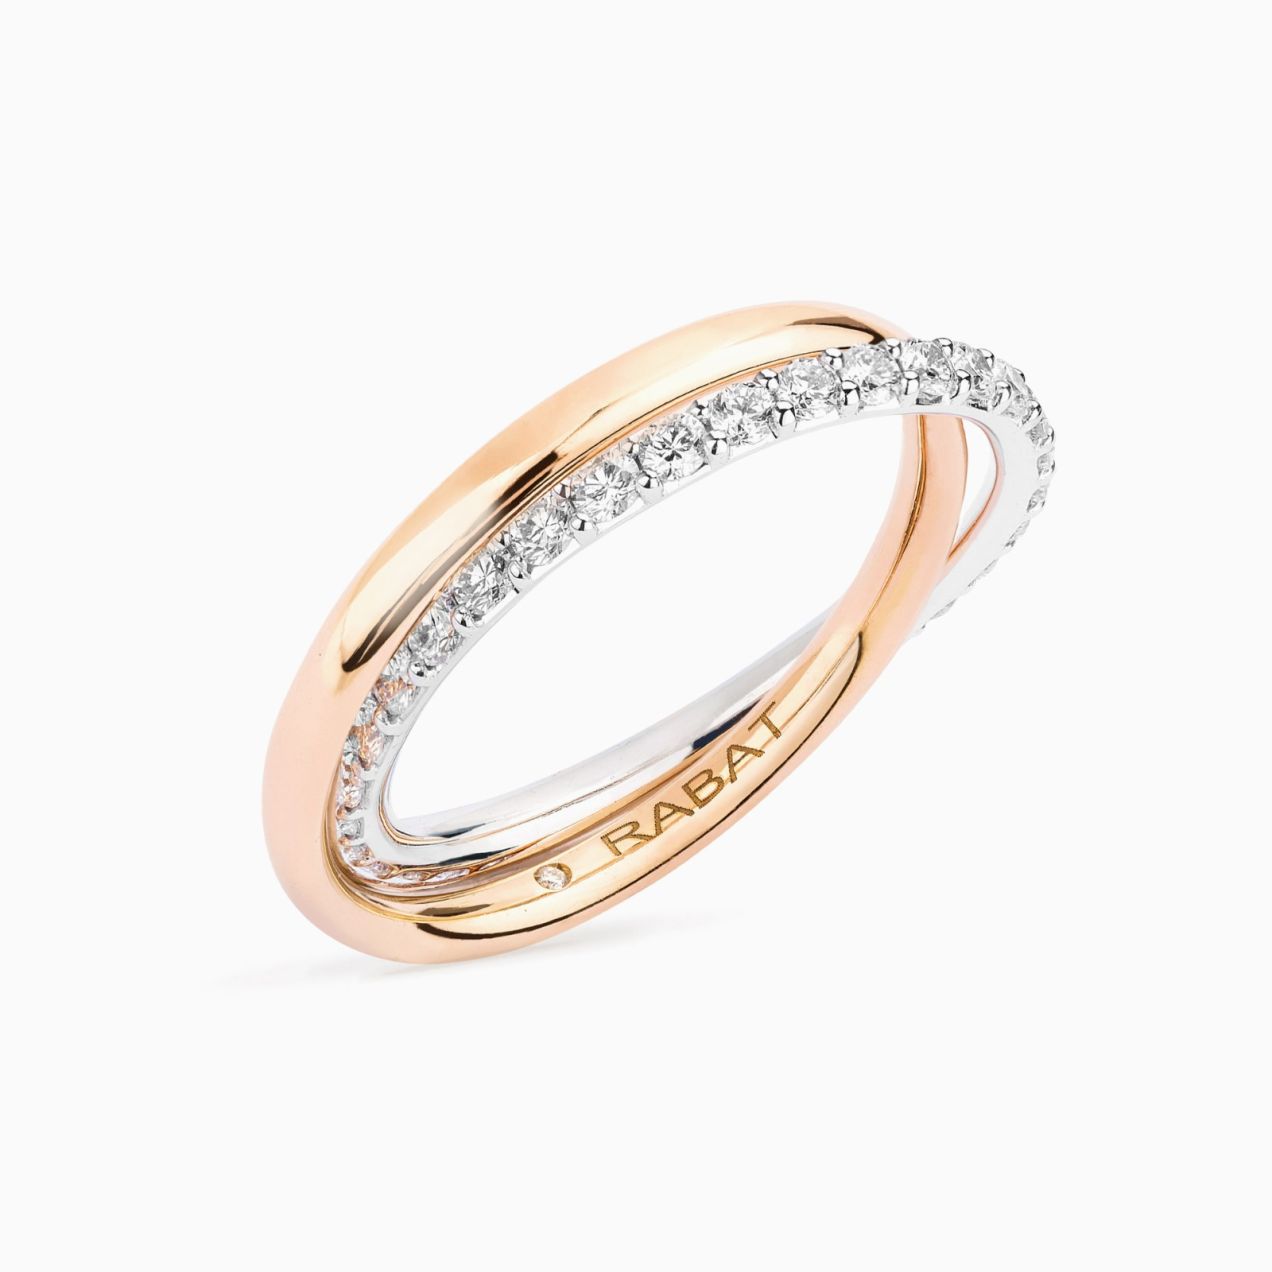 You and Me wedding band in rose and diamonds